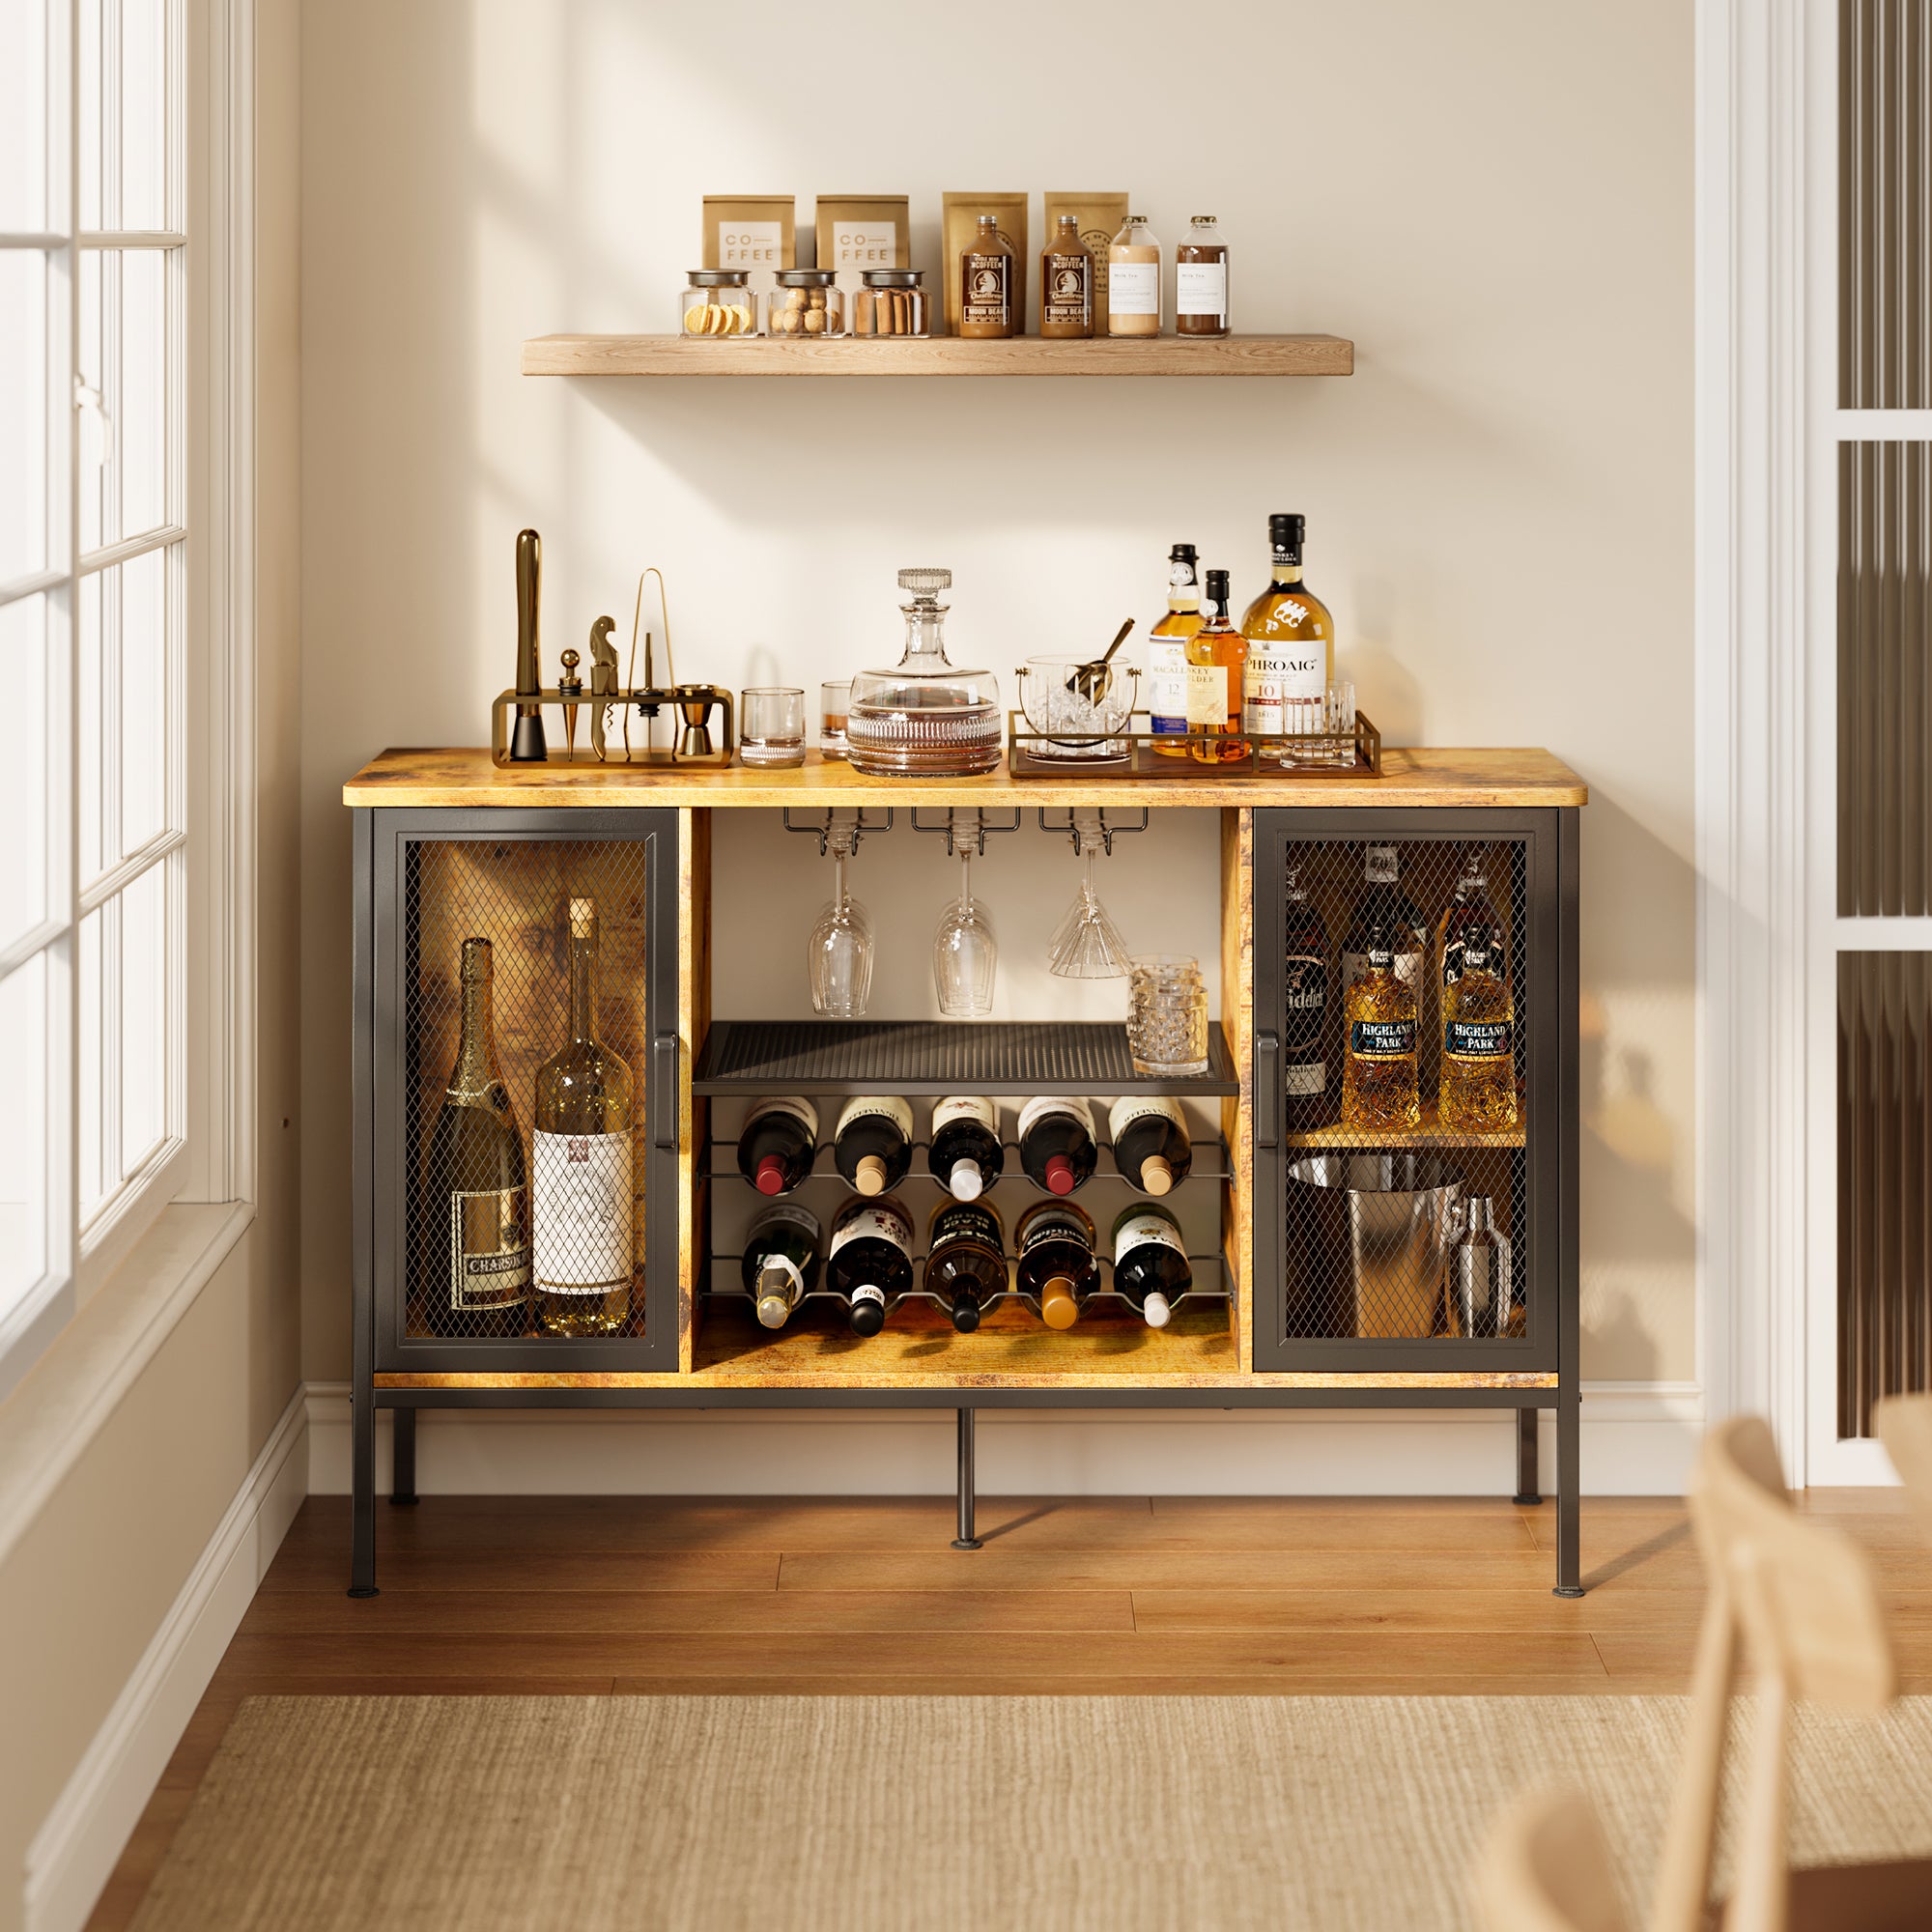 Gizoon WS30 Small Coffee Bar Cabinet with Storage Wine Rack